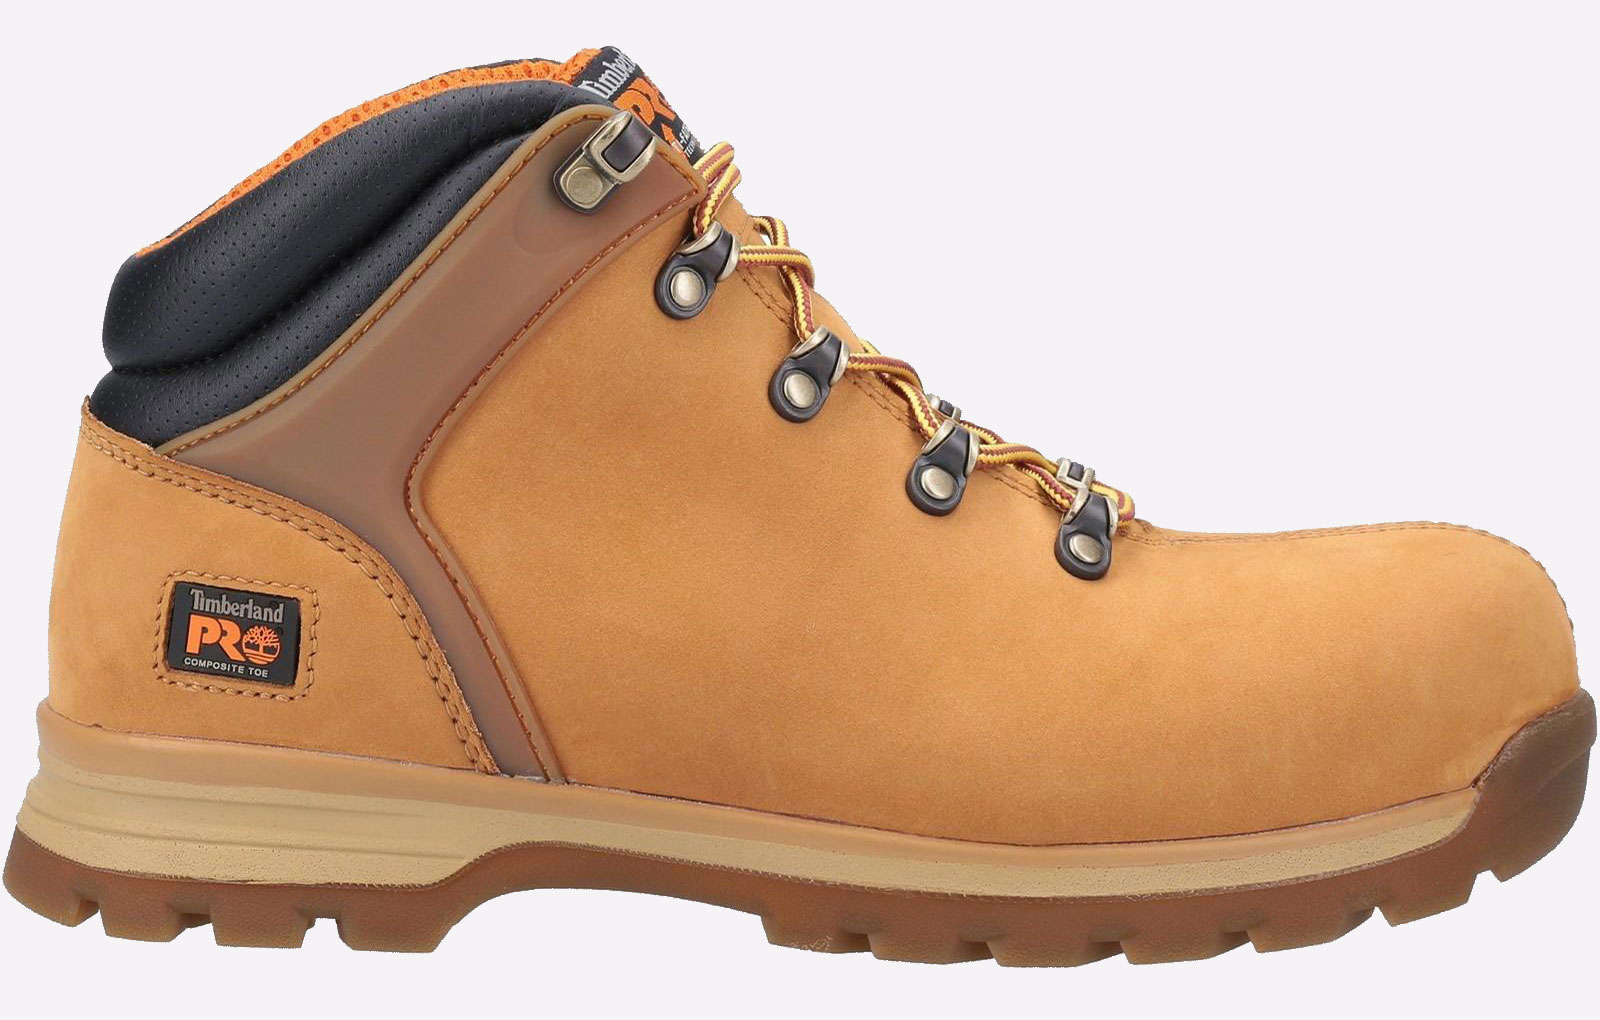 Timberland Pro Splitrock XT Composite Safety Toe Work Boot Mens  - GRD-30950-52790-14